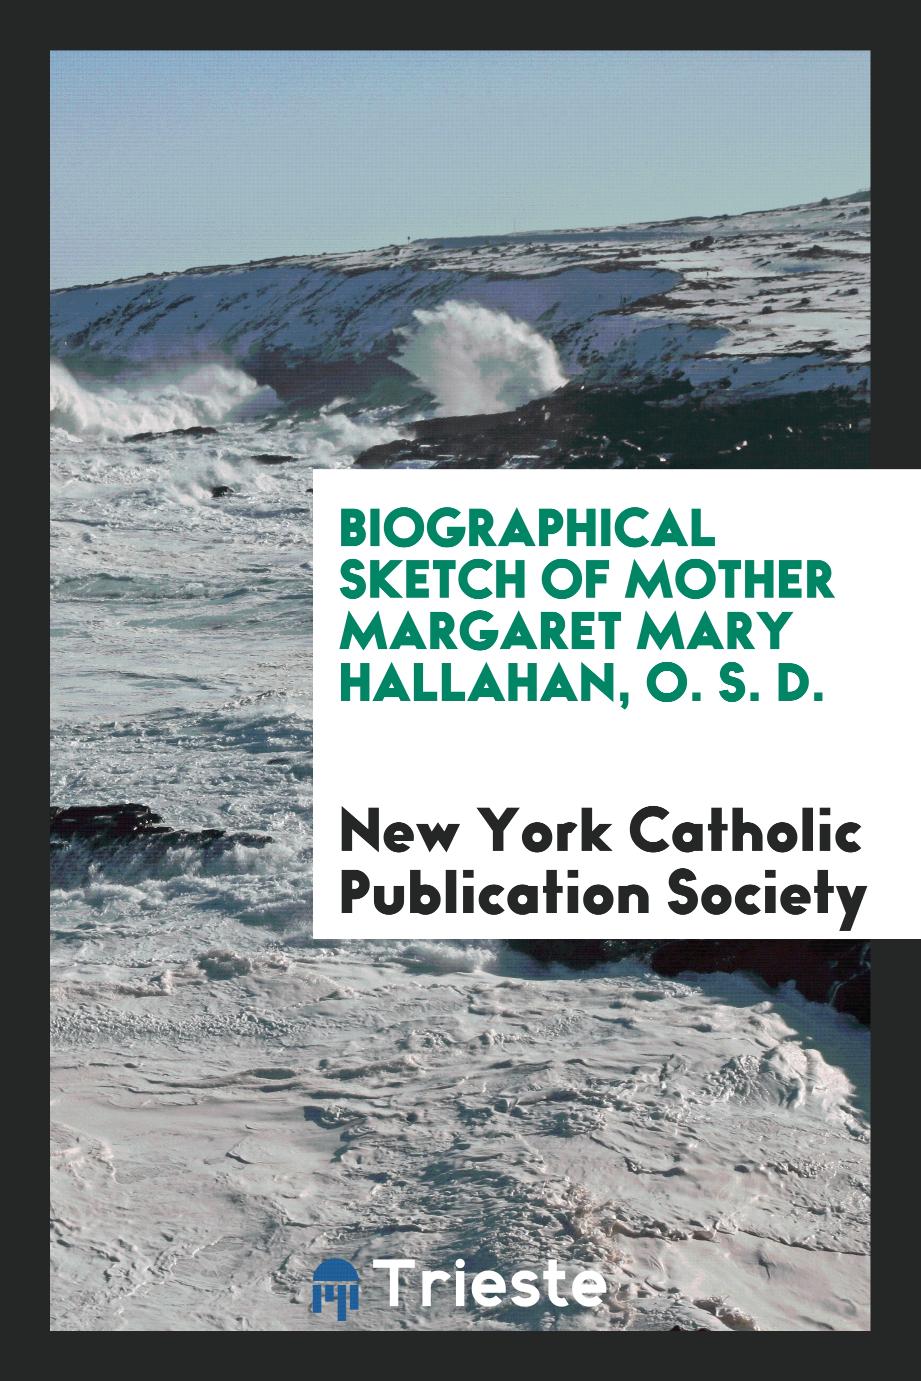 Biographical sketch of Mother Margaret Mary Hallahan, O. S. D.